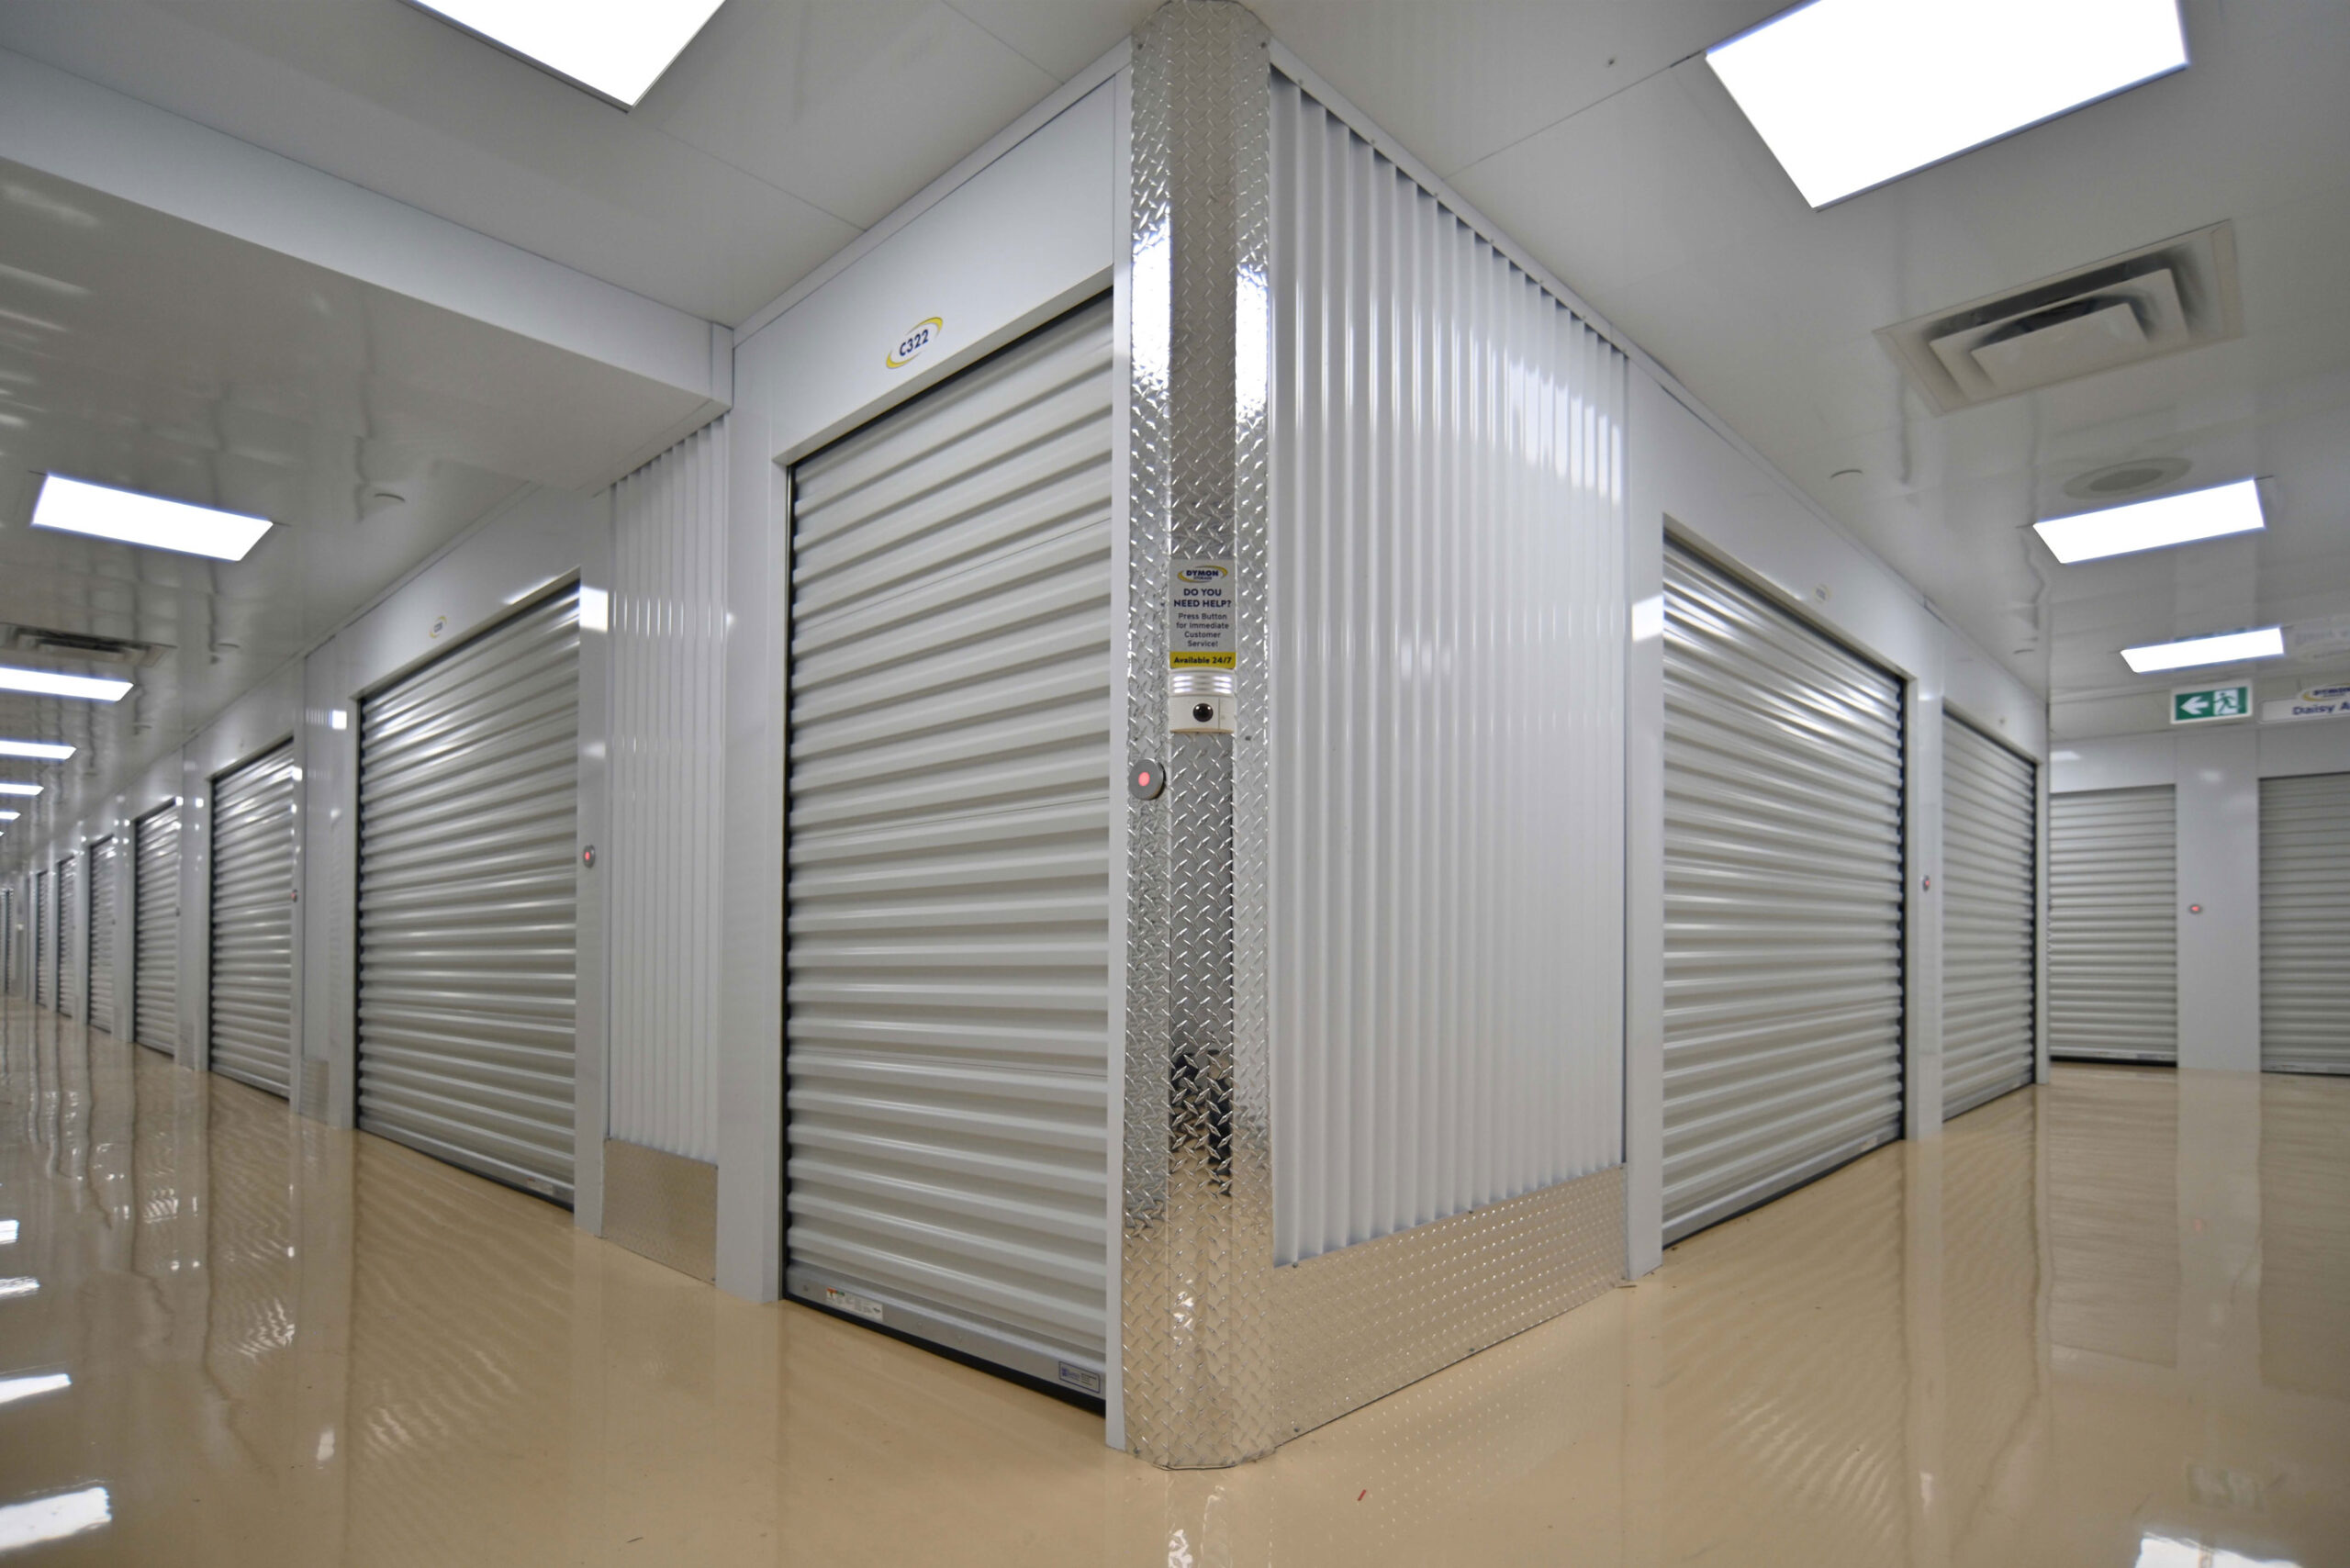 Corner view of two hallways intersecting with storage units